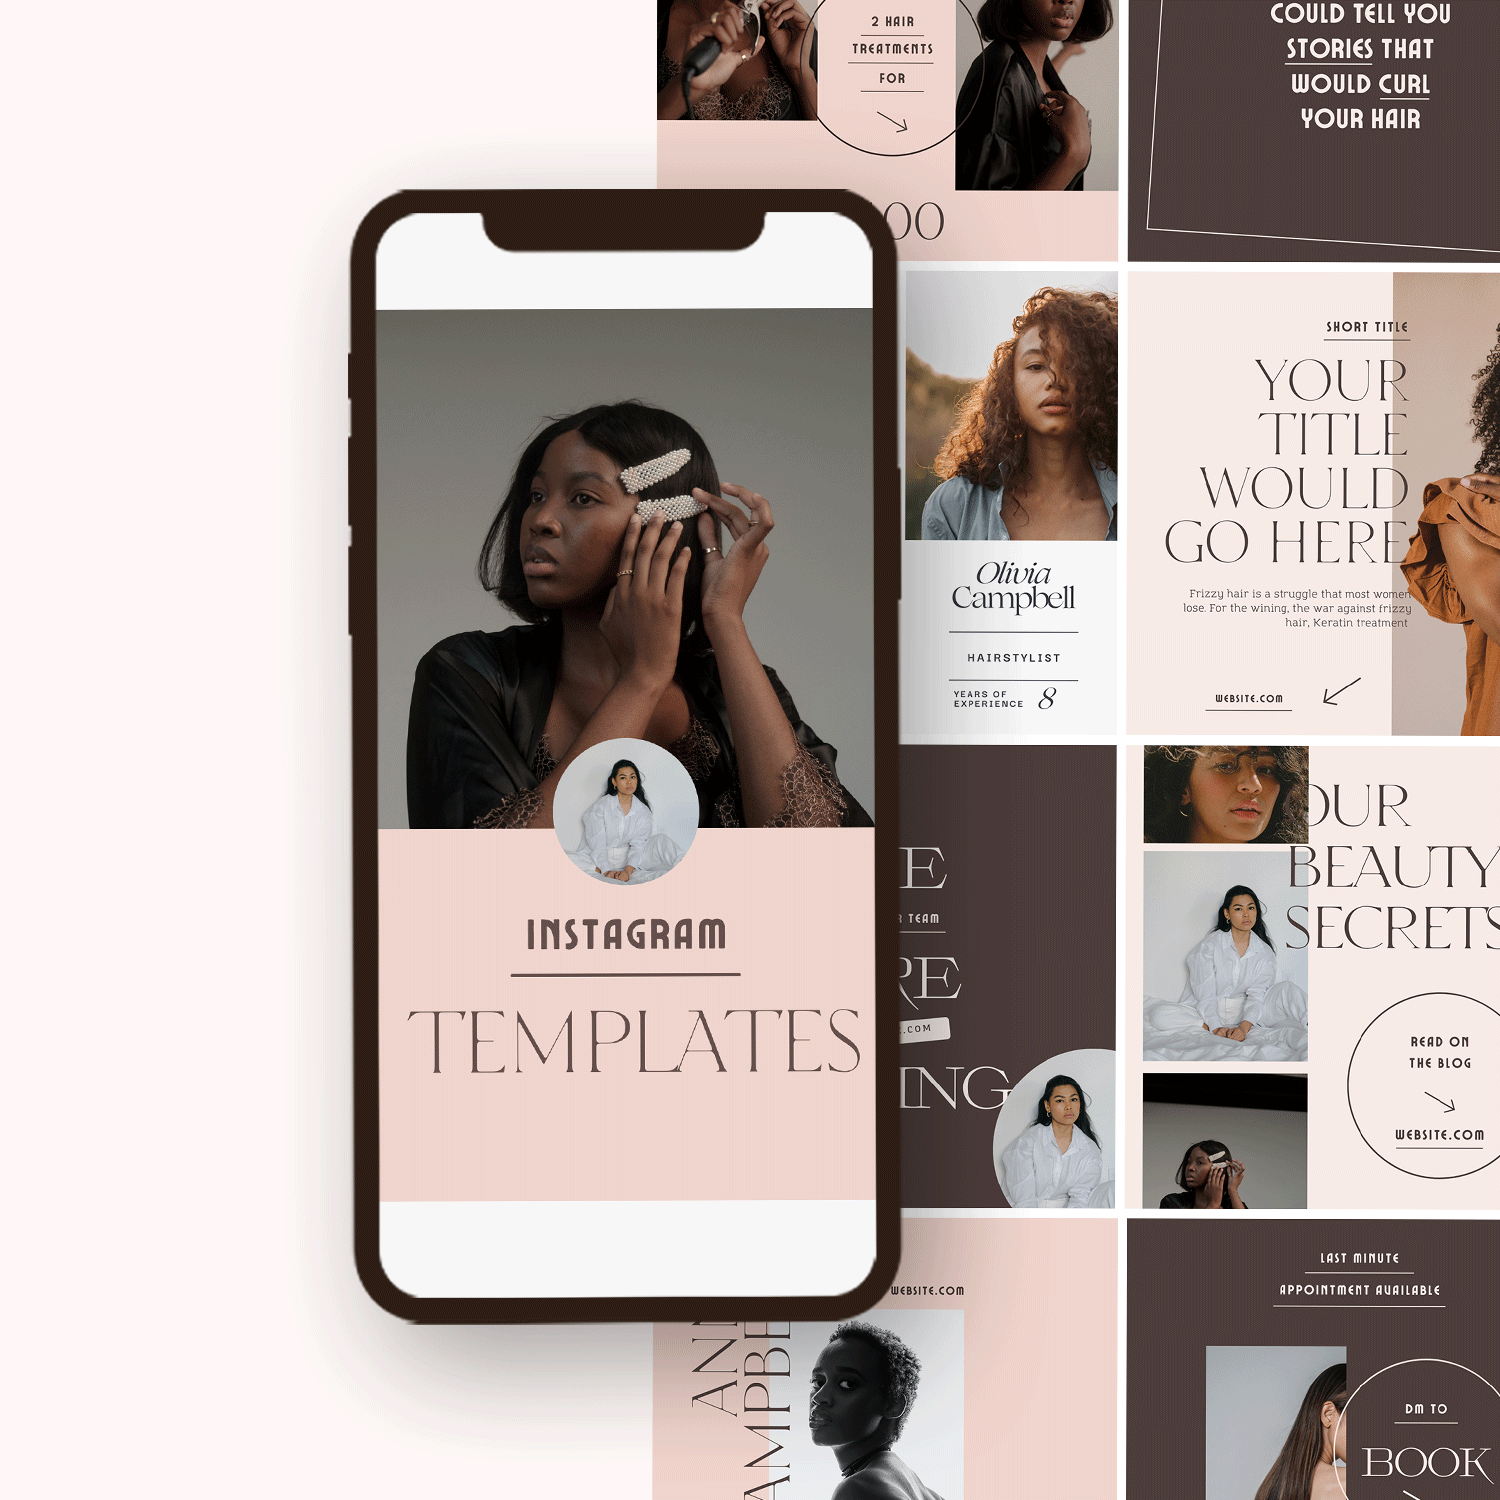 Makeup-Hairstylist-Instagram-Post-Story-Templates-Canva-Hair-Salon-Business-social-media-Feed-layout-Hairdresser-Quotes-beauty-spa-feminine.png